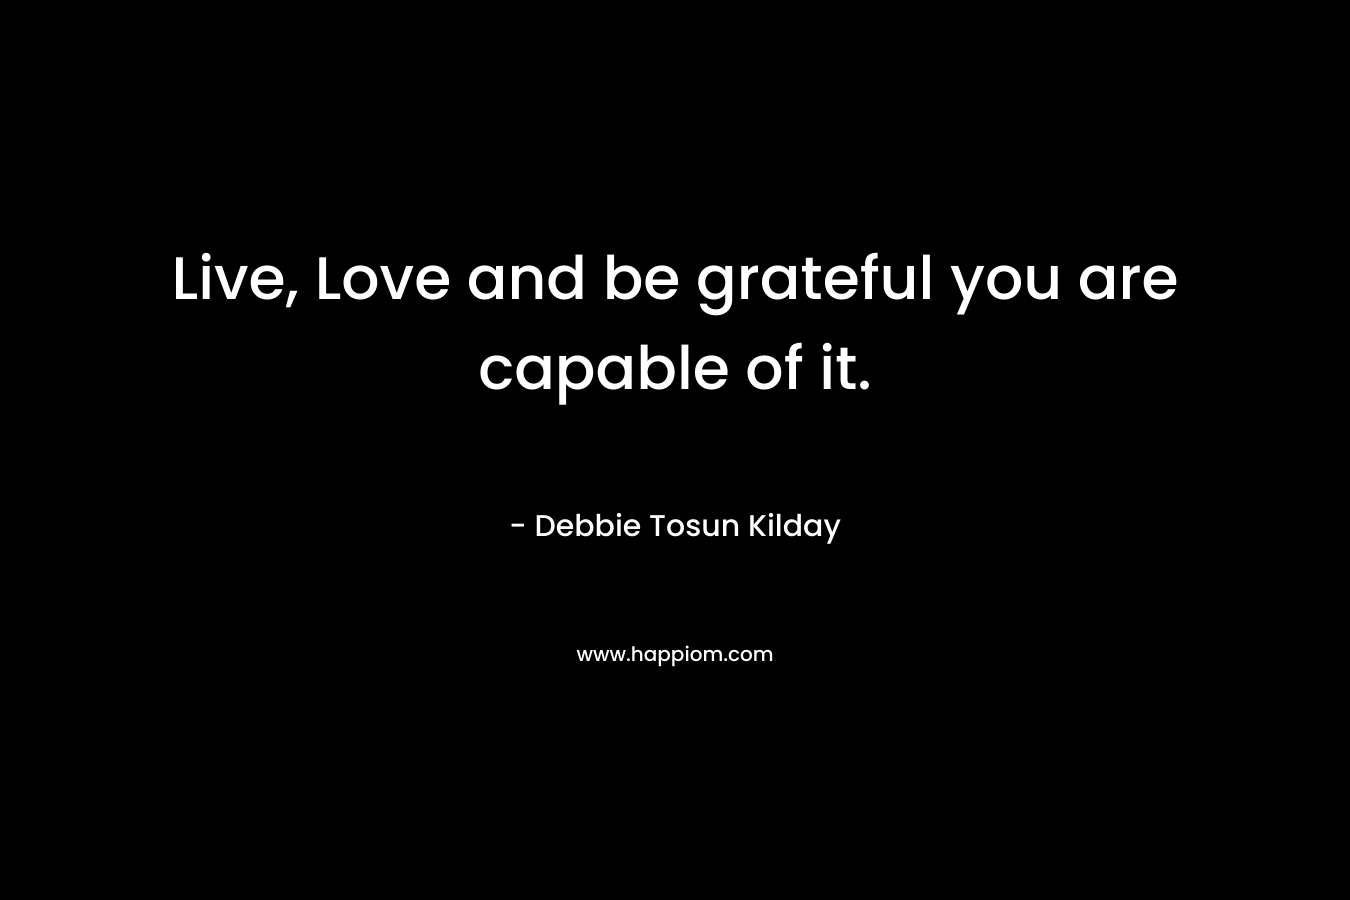 Live, Love and be grateful you are capable of it. – Debbie Tosun Kilday